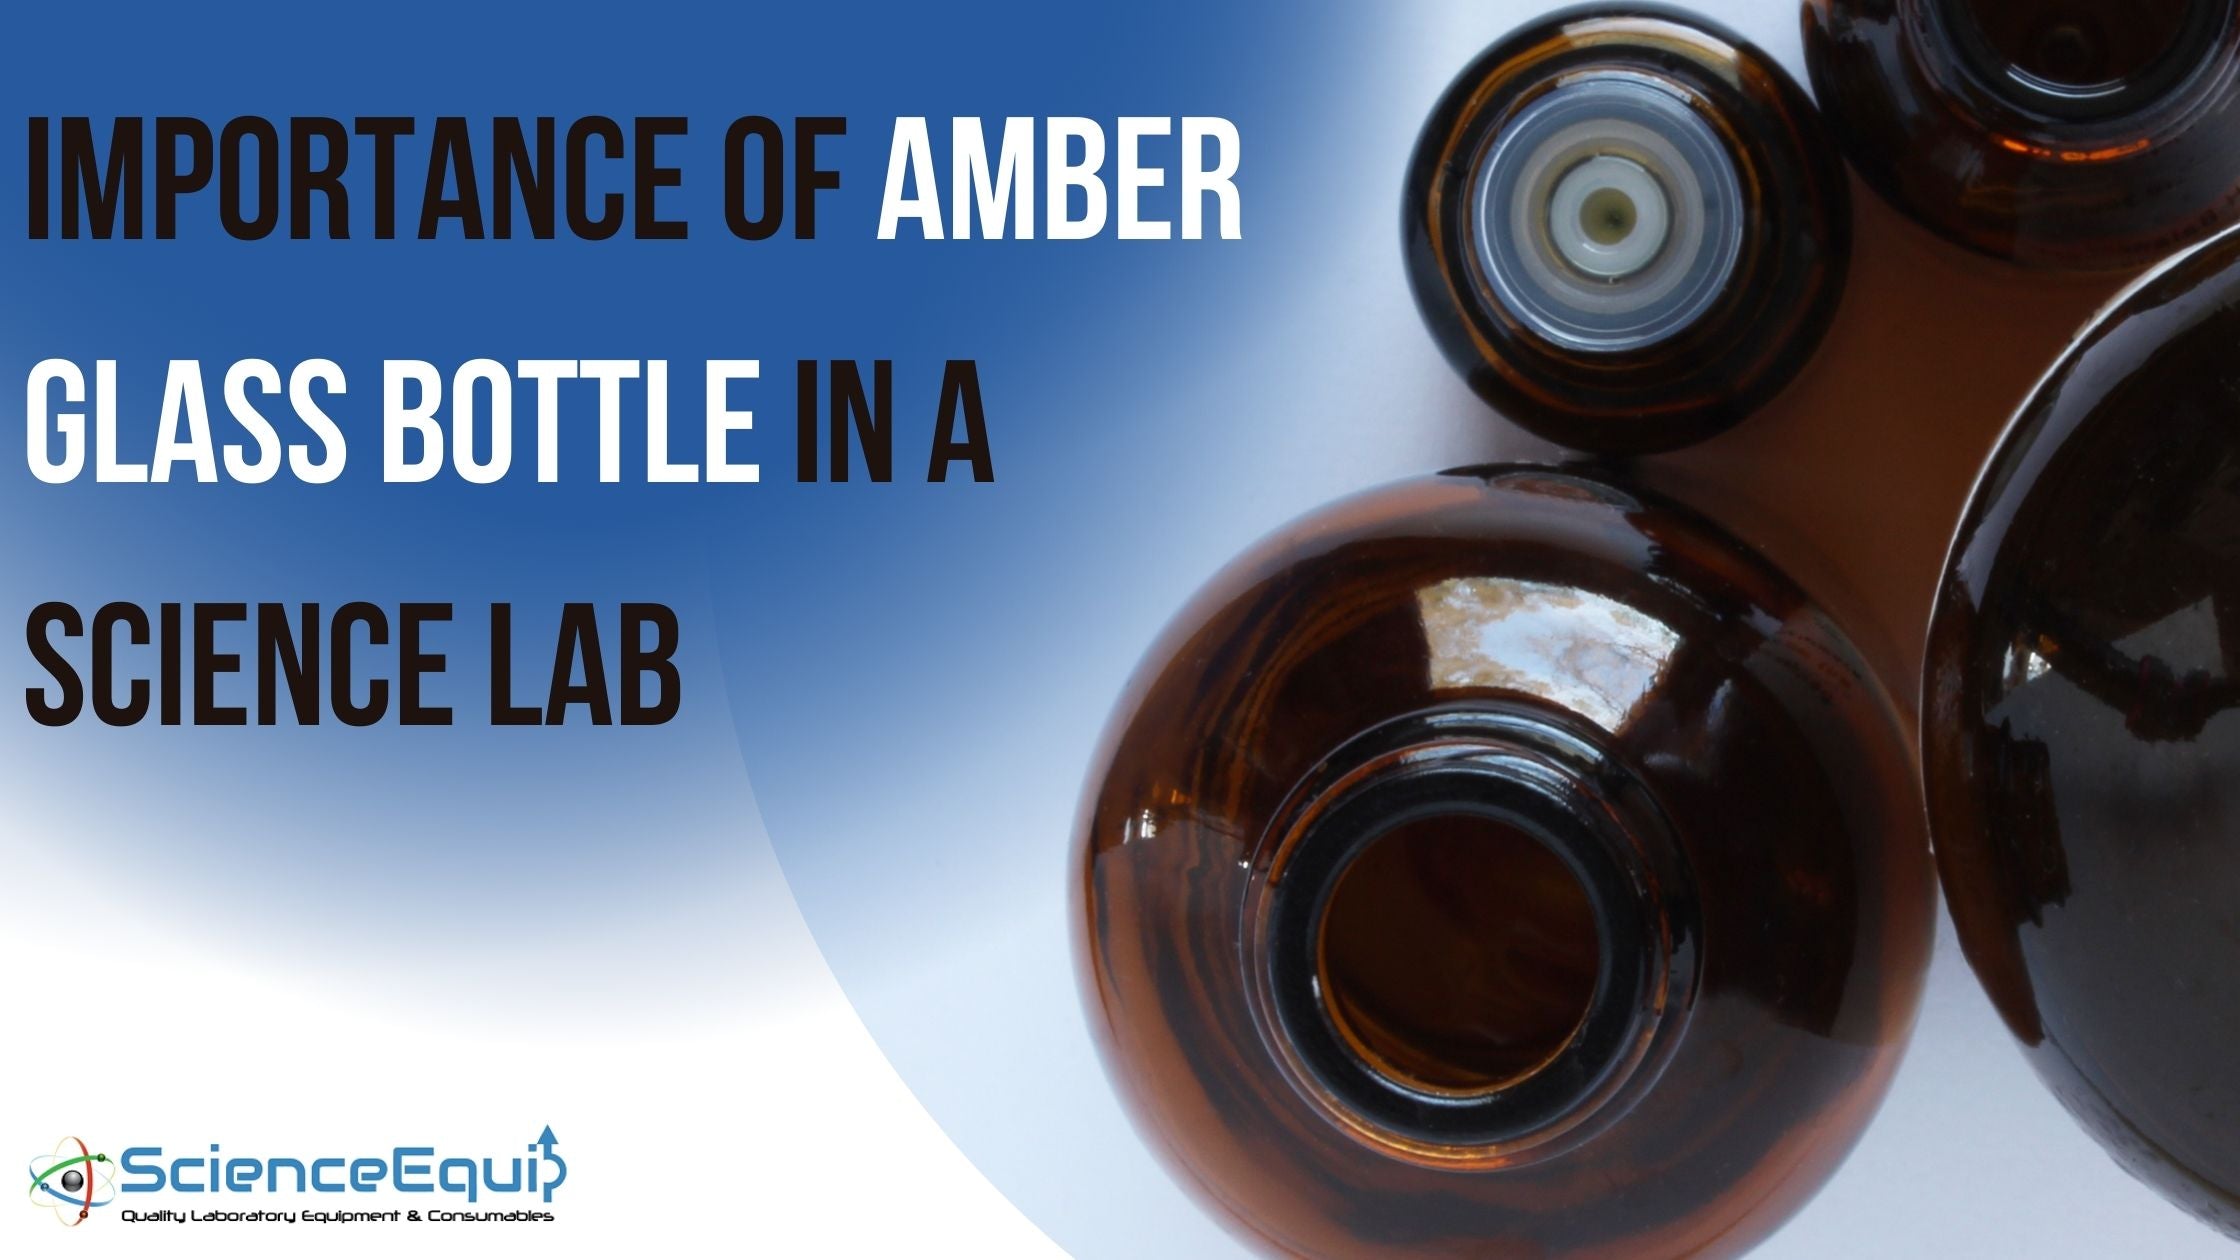 http://www.scienceequip.com.au/cdn/shop/articles/Importance_of_Amber_Glass_Bottle_in_a_science_lab.jpg?v=1651252347